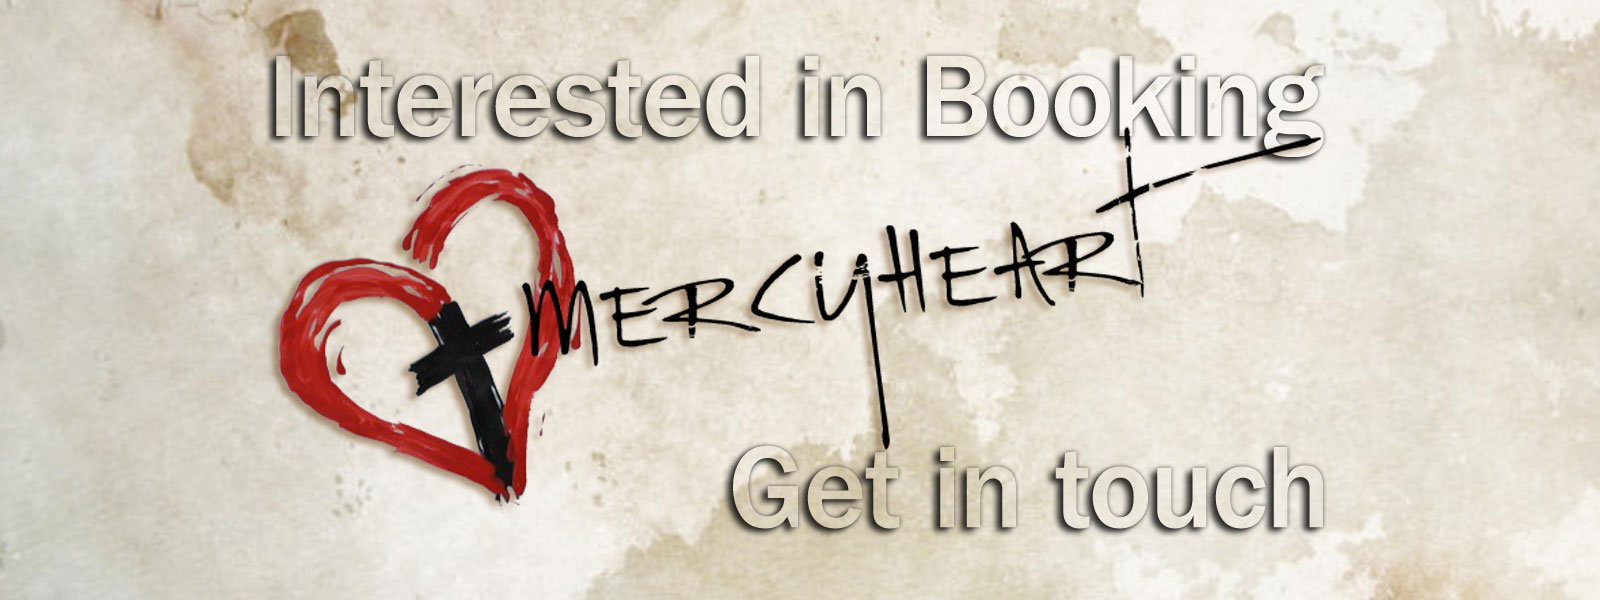 Interested in Booking MercyHeart?